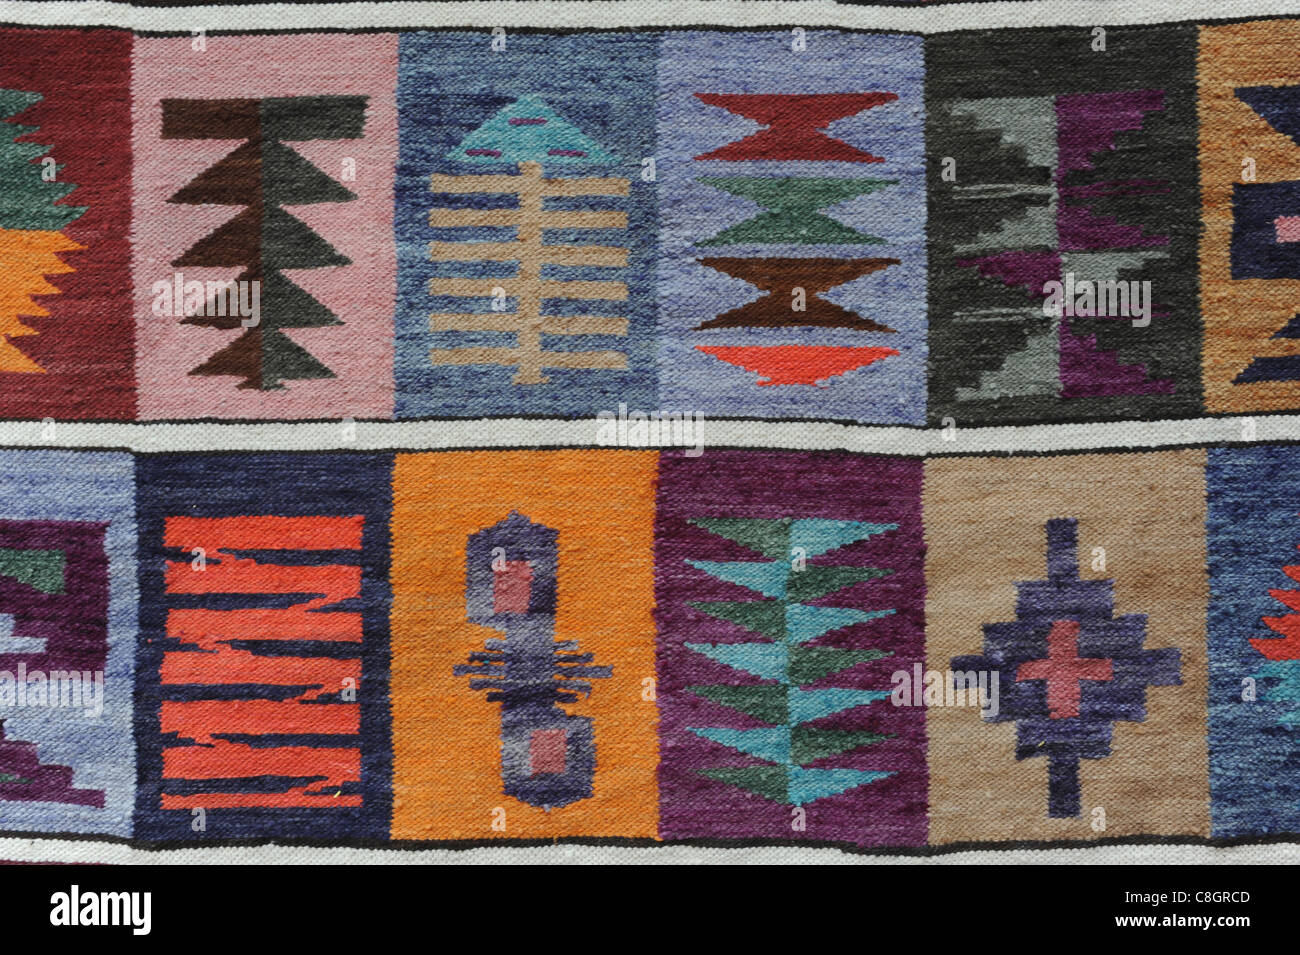 Argentina, South America, Purmamarca, Juiuy, textiles, dry goods, bright, colours, South American Indians, Inca, pattern, sample Stock Photo